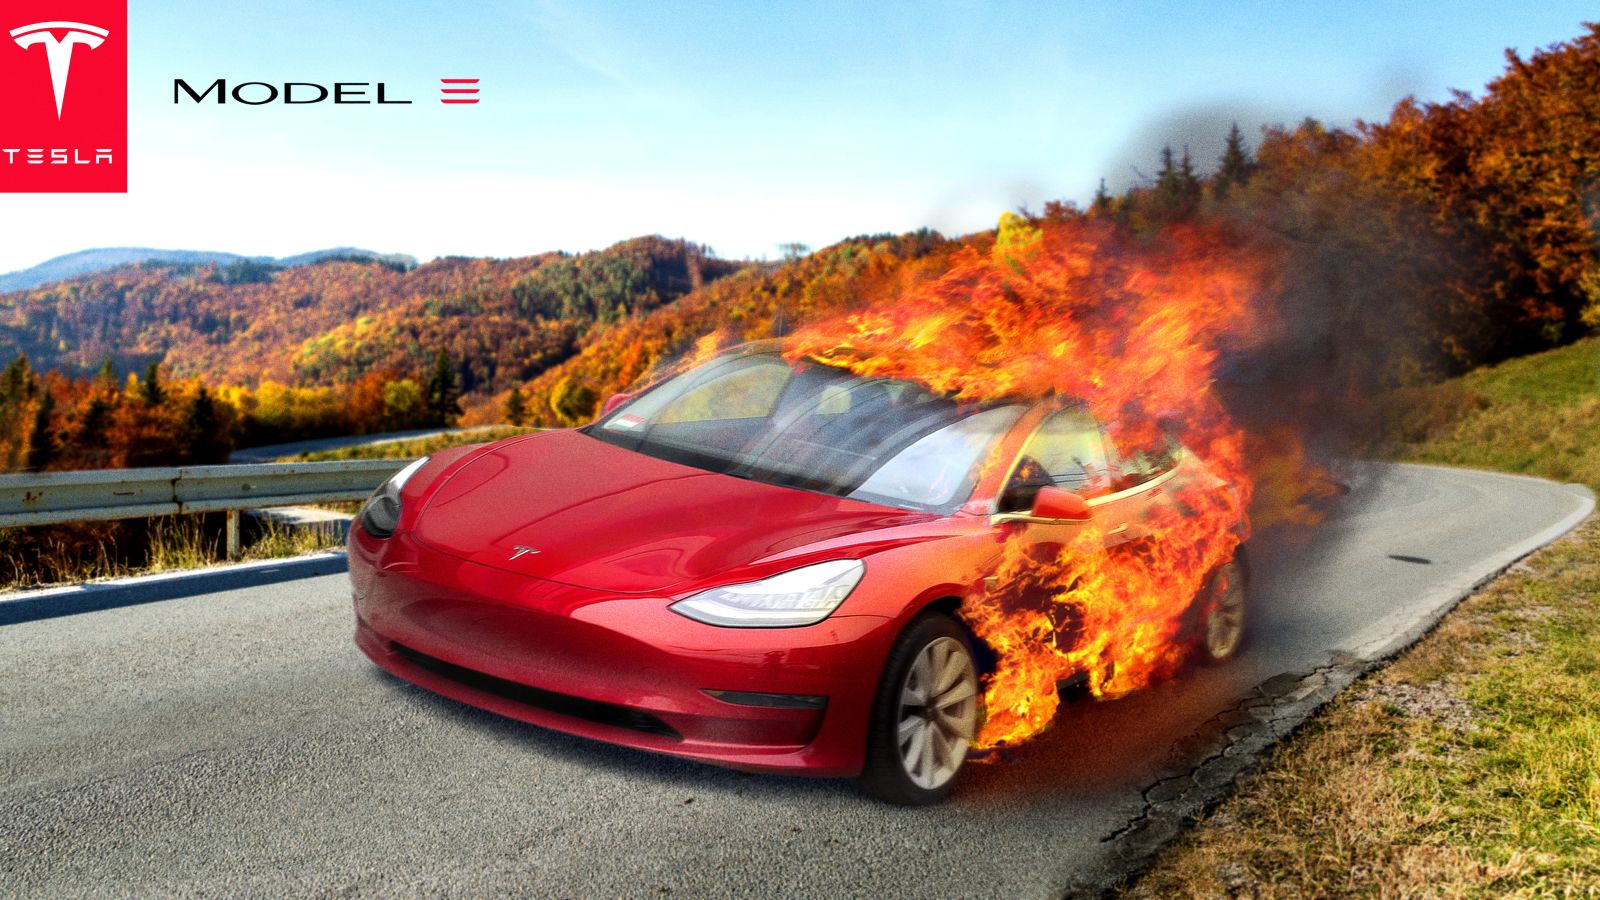 Illustration for article titled New Tesla Model 3 Goes From Zero To Engulfed In Flames In 3.5 Secondsem/em